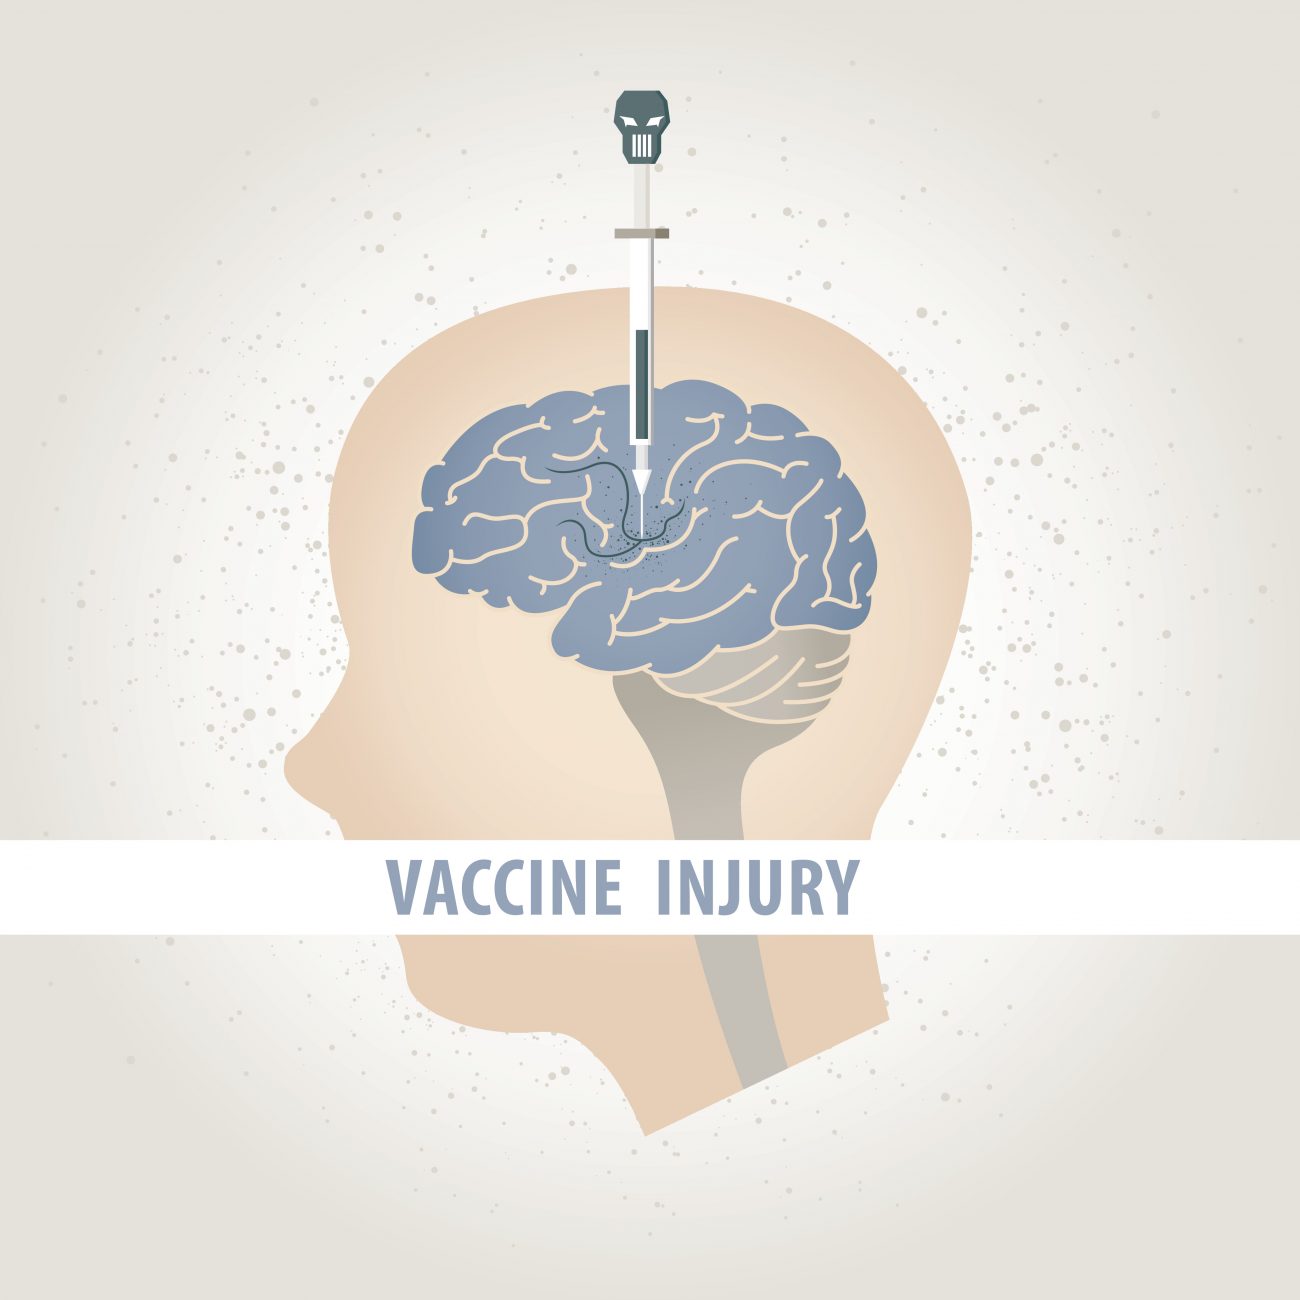 Vaccine injury illustration showing damage to the brain. This illustrates the link between forced vaccines on young children and the damage associated with the toxic overload from foreign substances and additives.